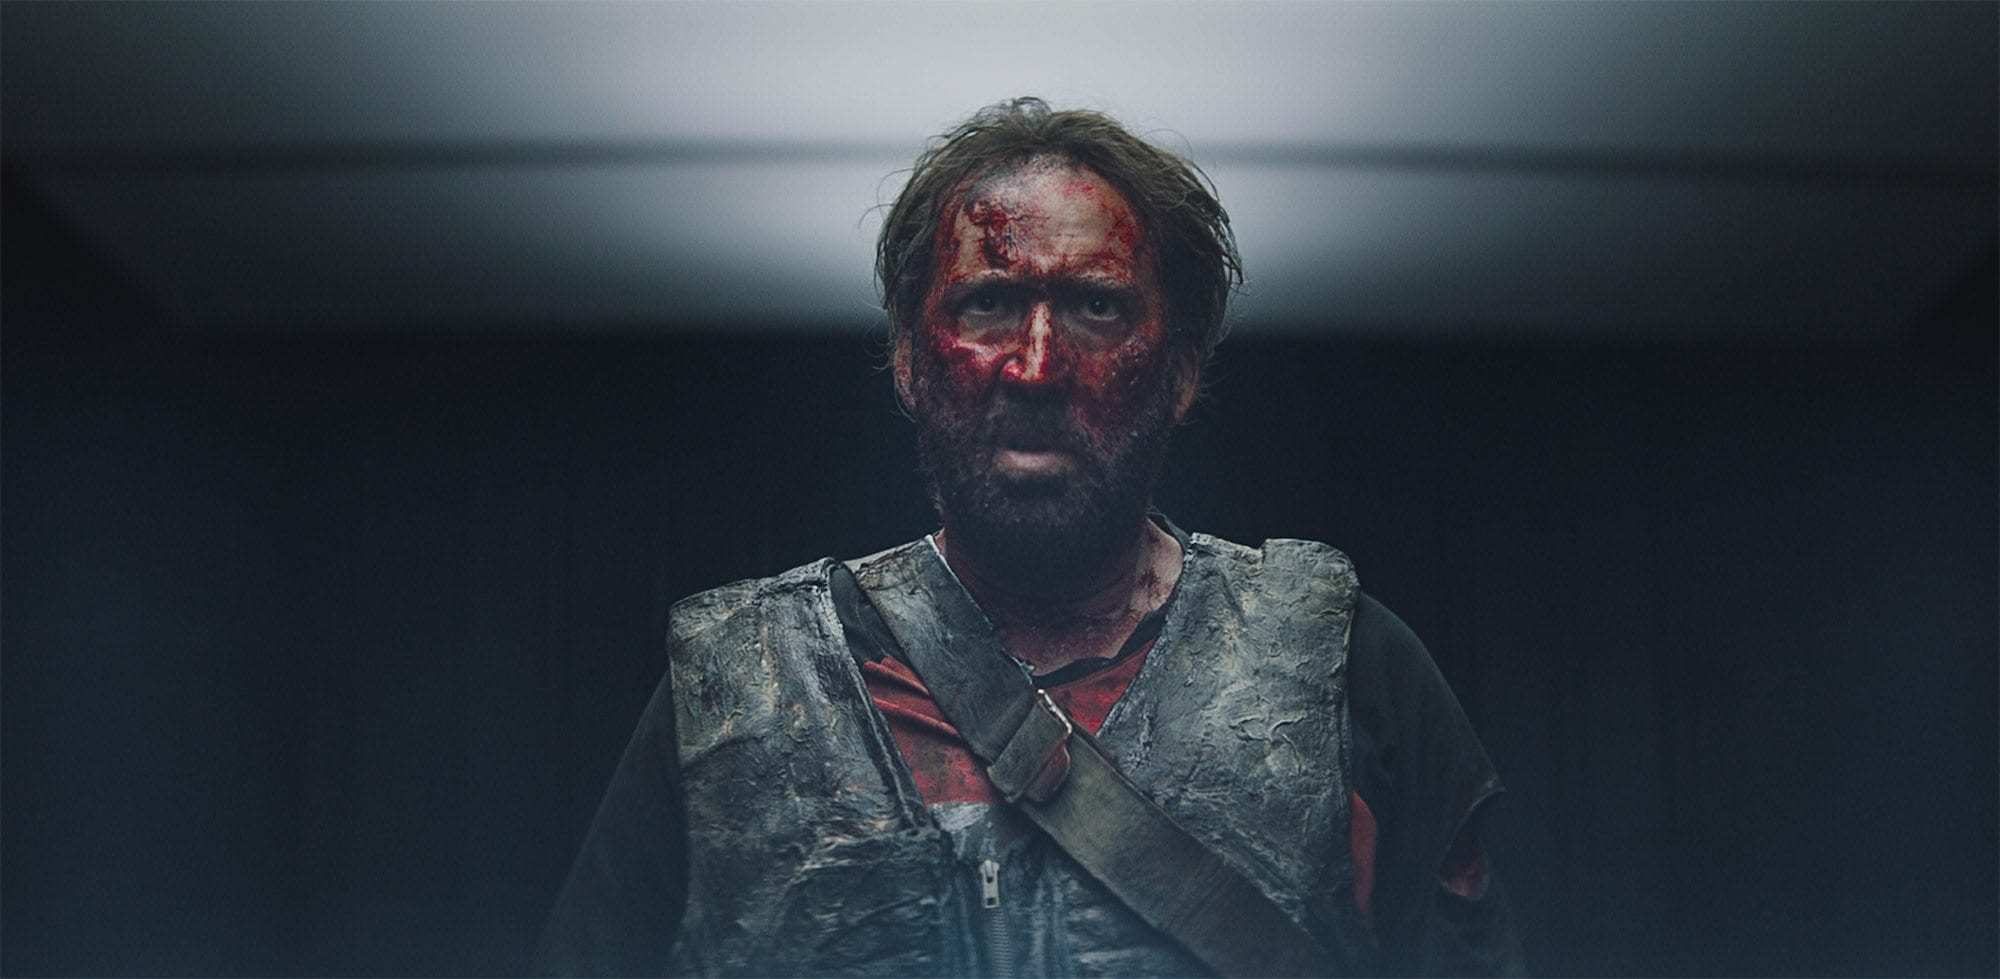 Nicolas Cage in 'Mandy' may be his most outlandish role ever. Here’s our ranking of the ten most insane facial expressions from Cage’s movies thus far.